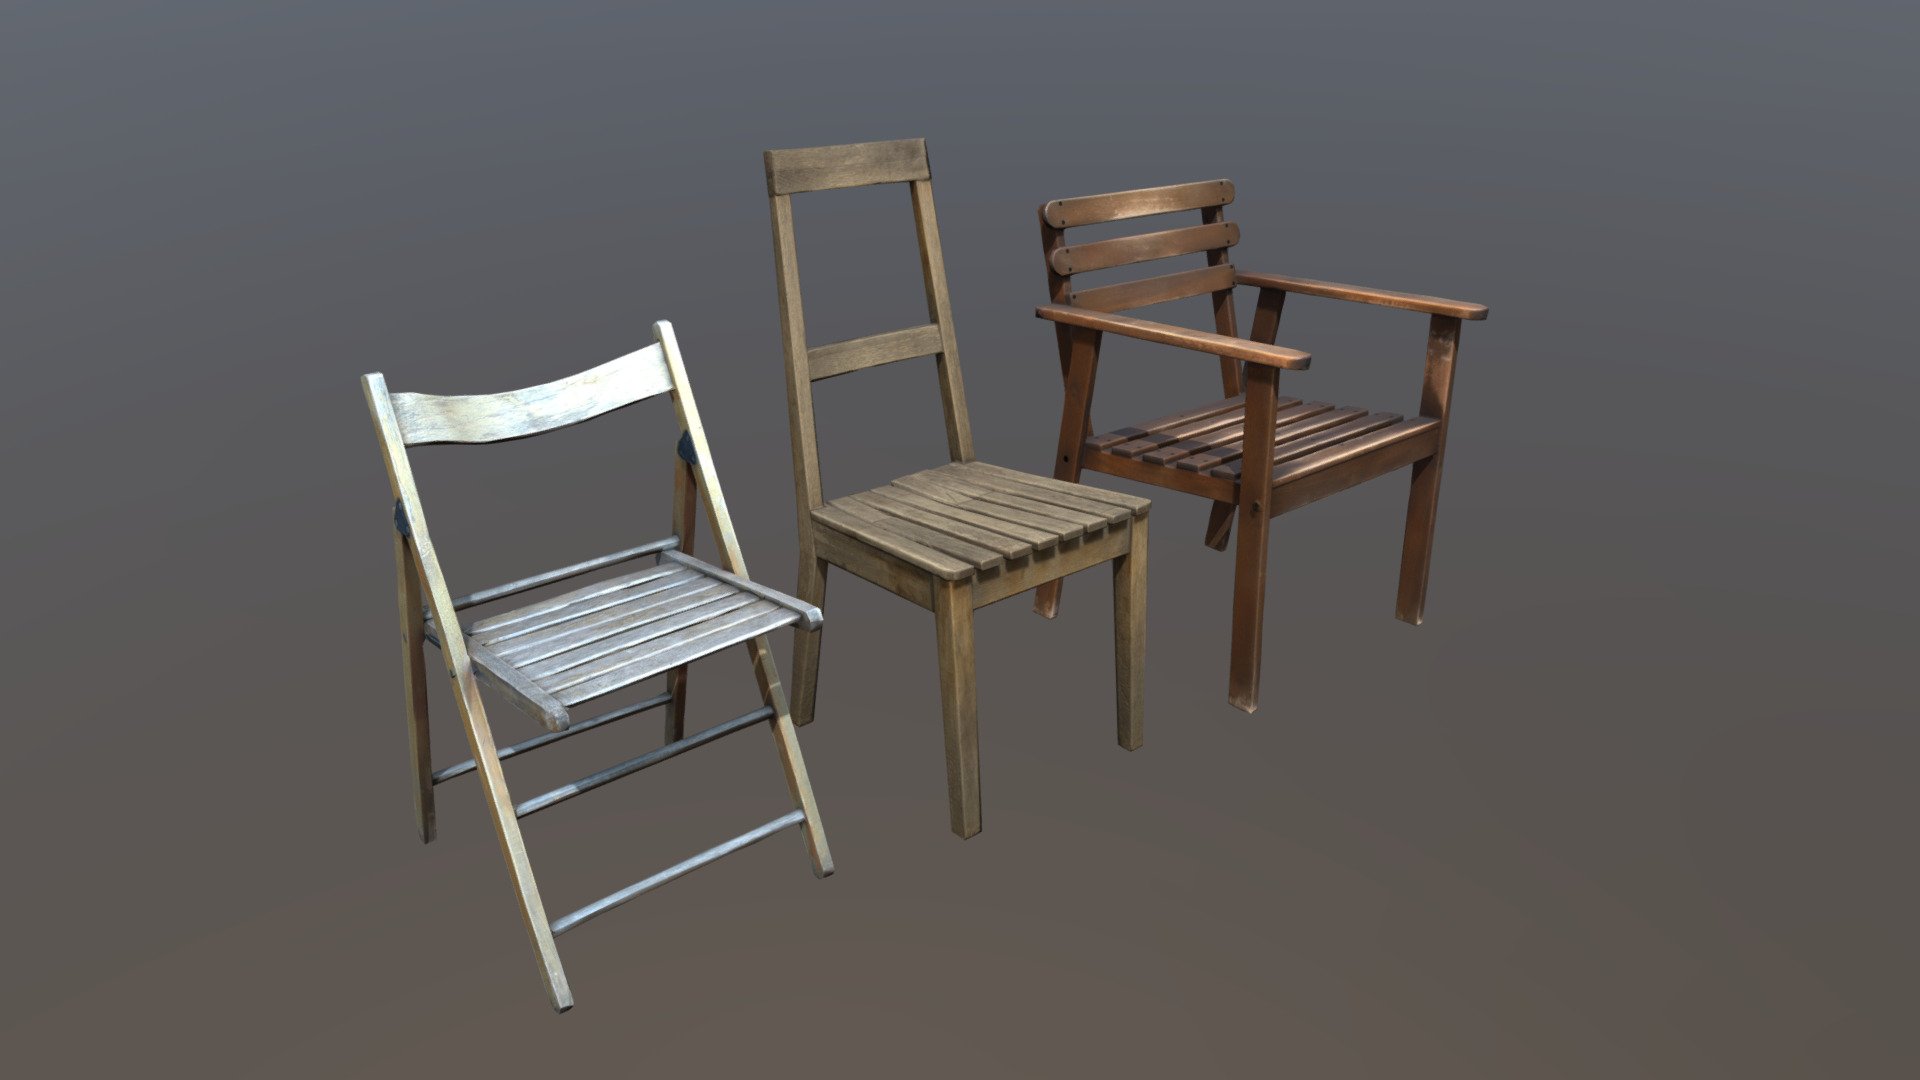 Pack of three Wooden Chairs; photoscanned (360°), decimated, cleaned, with UVs &amp; PBR Texture setup.
*
Texture Set
Applies to each model seperately
*  2048x2048 / PNG
*  Albedo (Diffuse) / Roughness / Normal (OpenGL) / Ambient Occlusion / Metallic 

Additional information


Real World Scale
Z up
Free of legal issues, branding/labels are made up, adjusted or removed.

Additional files


.Blend File

Check out my other Models, Packs, Materials and Photoscans by clicking here.

Contact: hello@notoir.xyz 

Follow me on:
Instagram
Twitter
Artstation

Disclaimer


If you need any support/assistance, comment below or mail me and I will respond as quickly as possible.
Dataset, High Poly Scan and 4K+ Textures available upon request ($). 
Models may be used in any commercial or personal project. They may not be resold or redistributed.
 - Wooden Chairs (Pack) / Photoscan / Low Poly PBR - Buy Royalty Free 3D model by NOTOIR.XYZ (@Notoir) 3d model